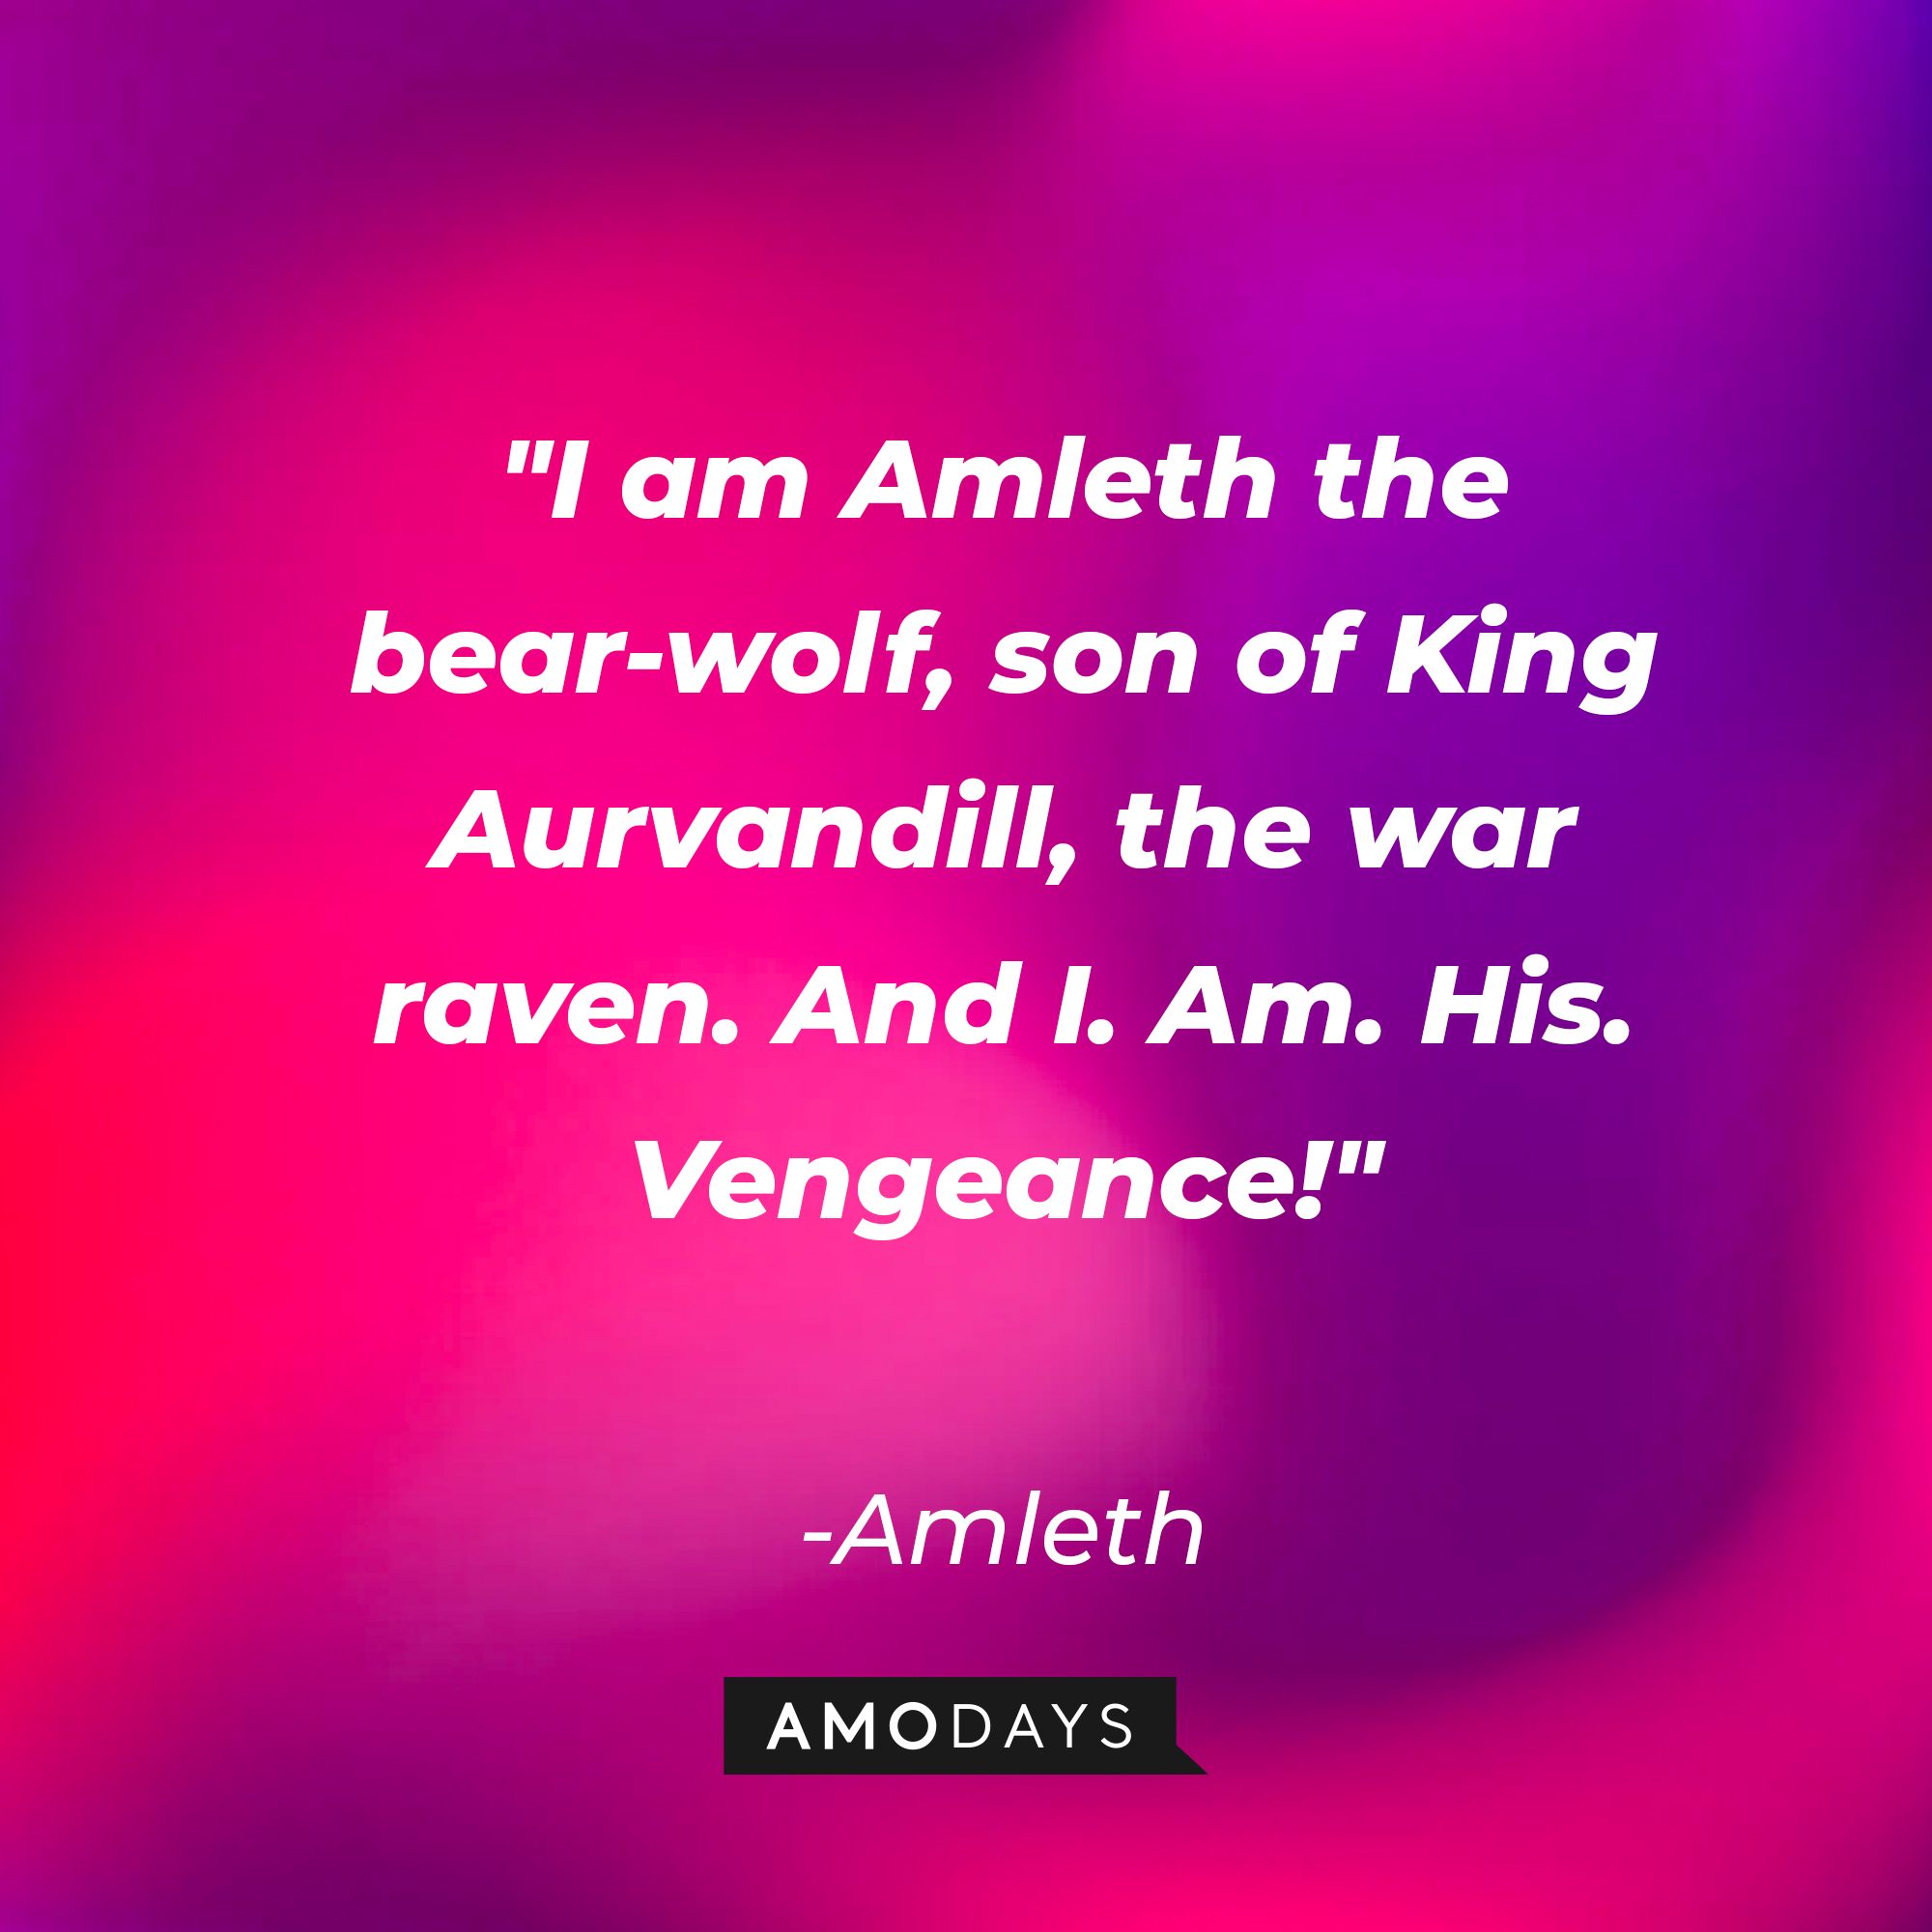 Amleth's quote: "I am Amleth the bear-wolf, son of King Aurvandill, the war raven. And I. Am. His. Vengeance!" | Source: AmoDays